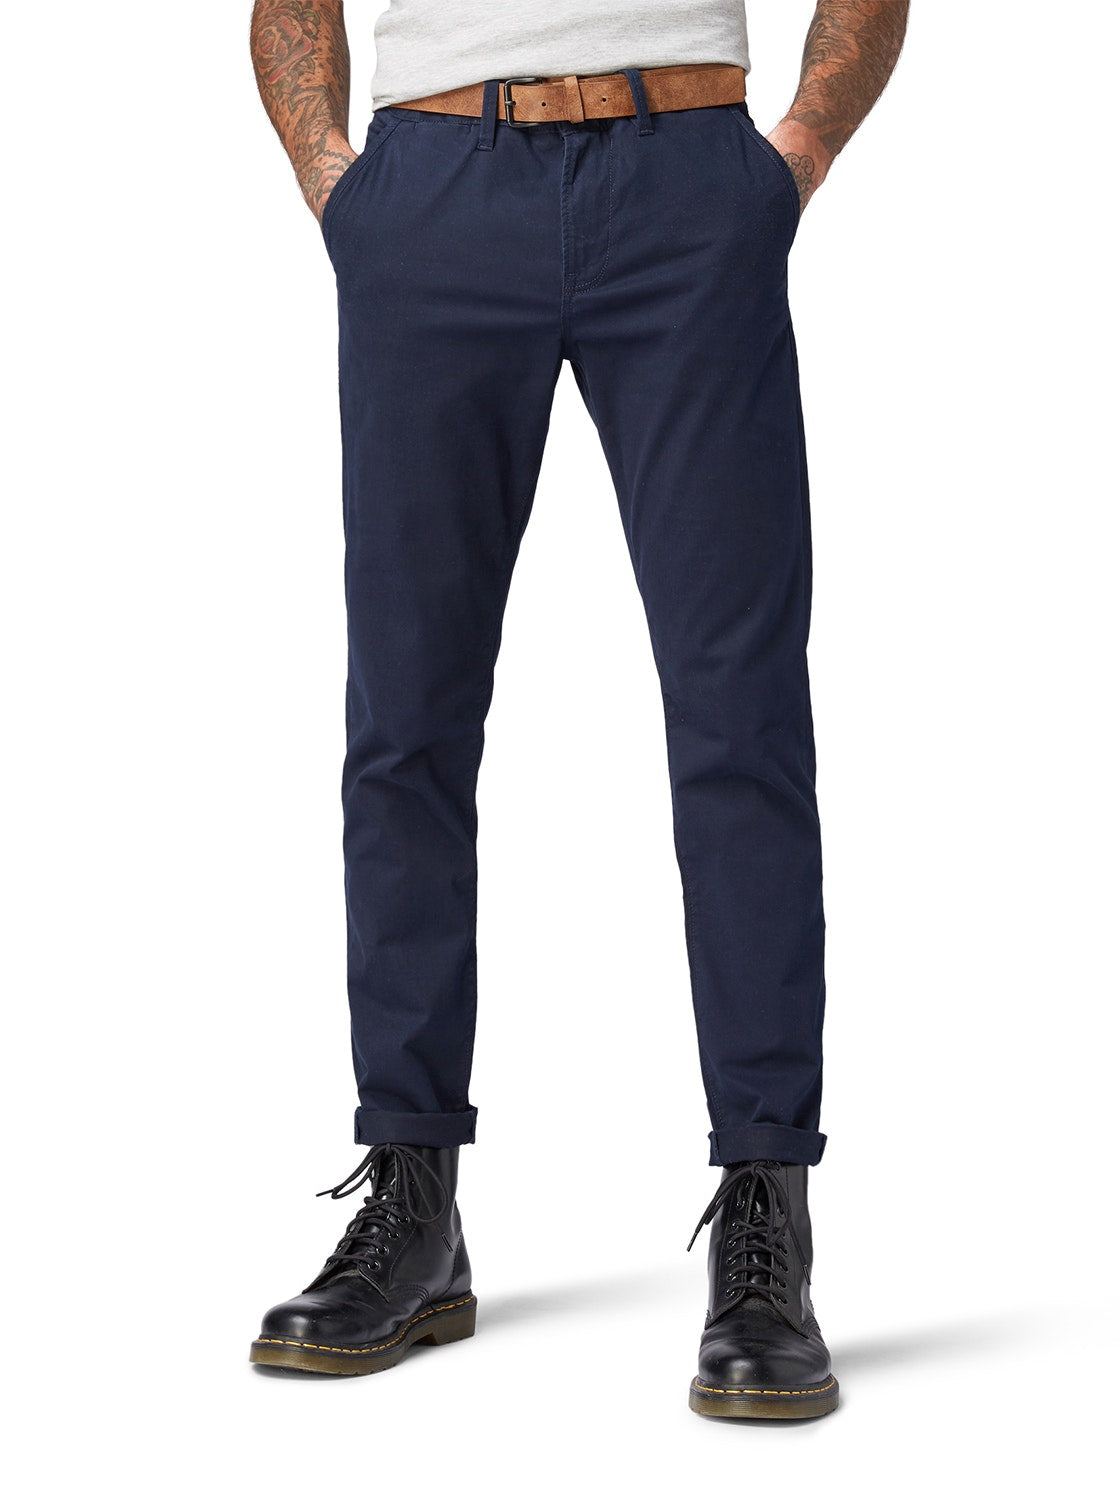 Slim Chino with belt (Sky Captain Bl)